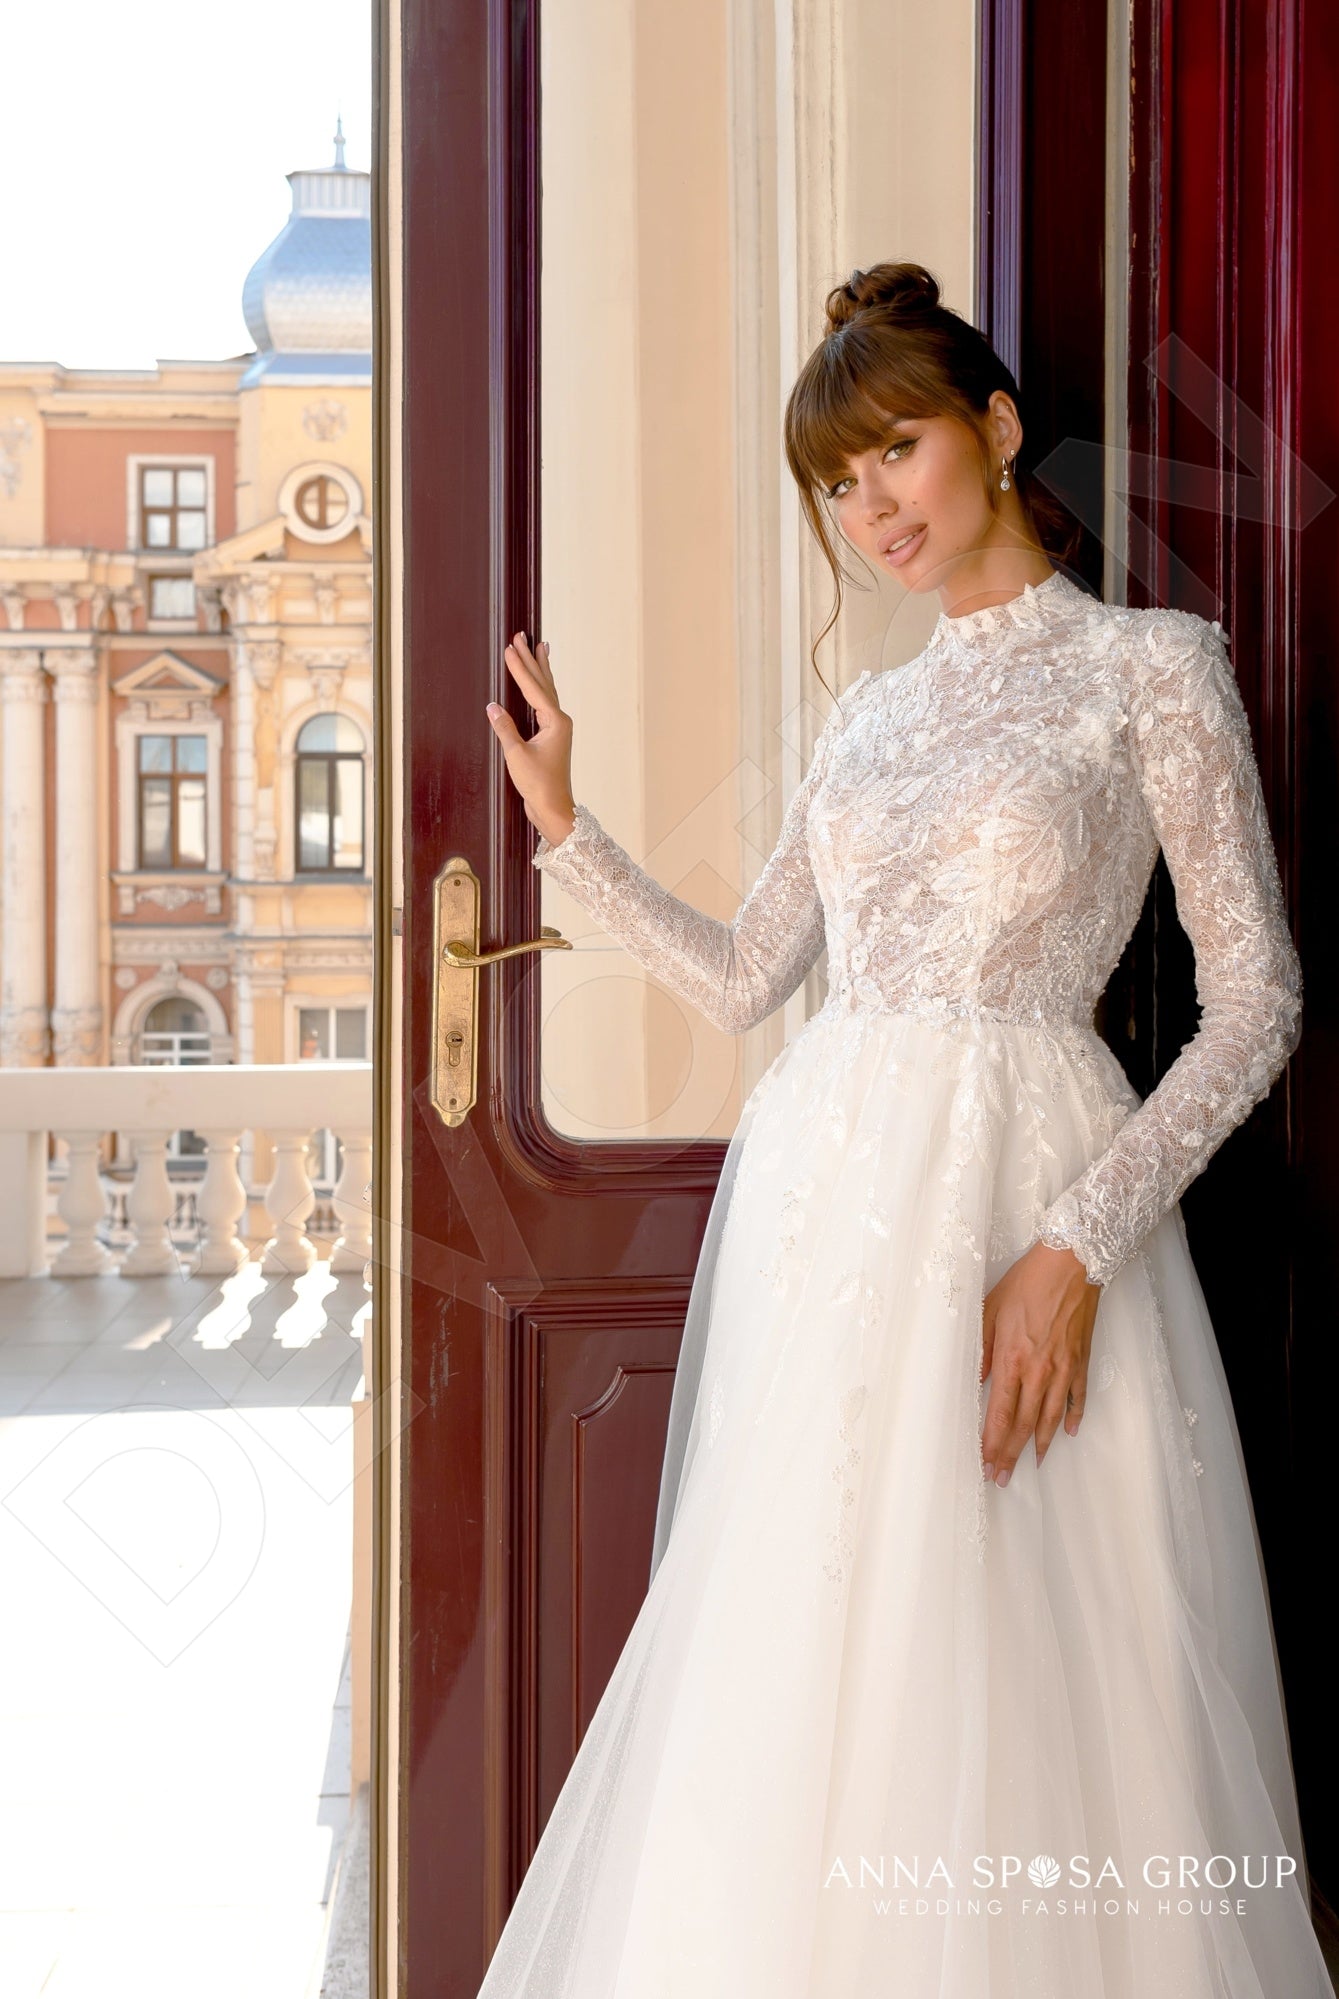 Wedding dress with high-neck bodice and sheer lace sleeve | Cathy Telle